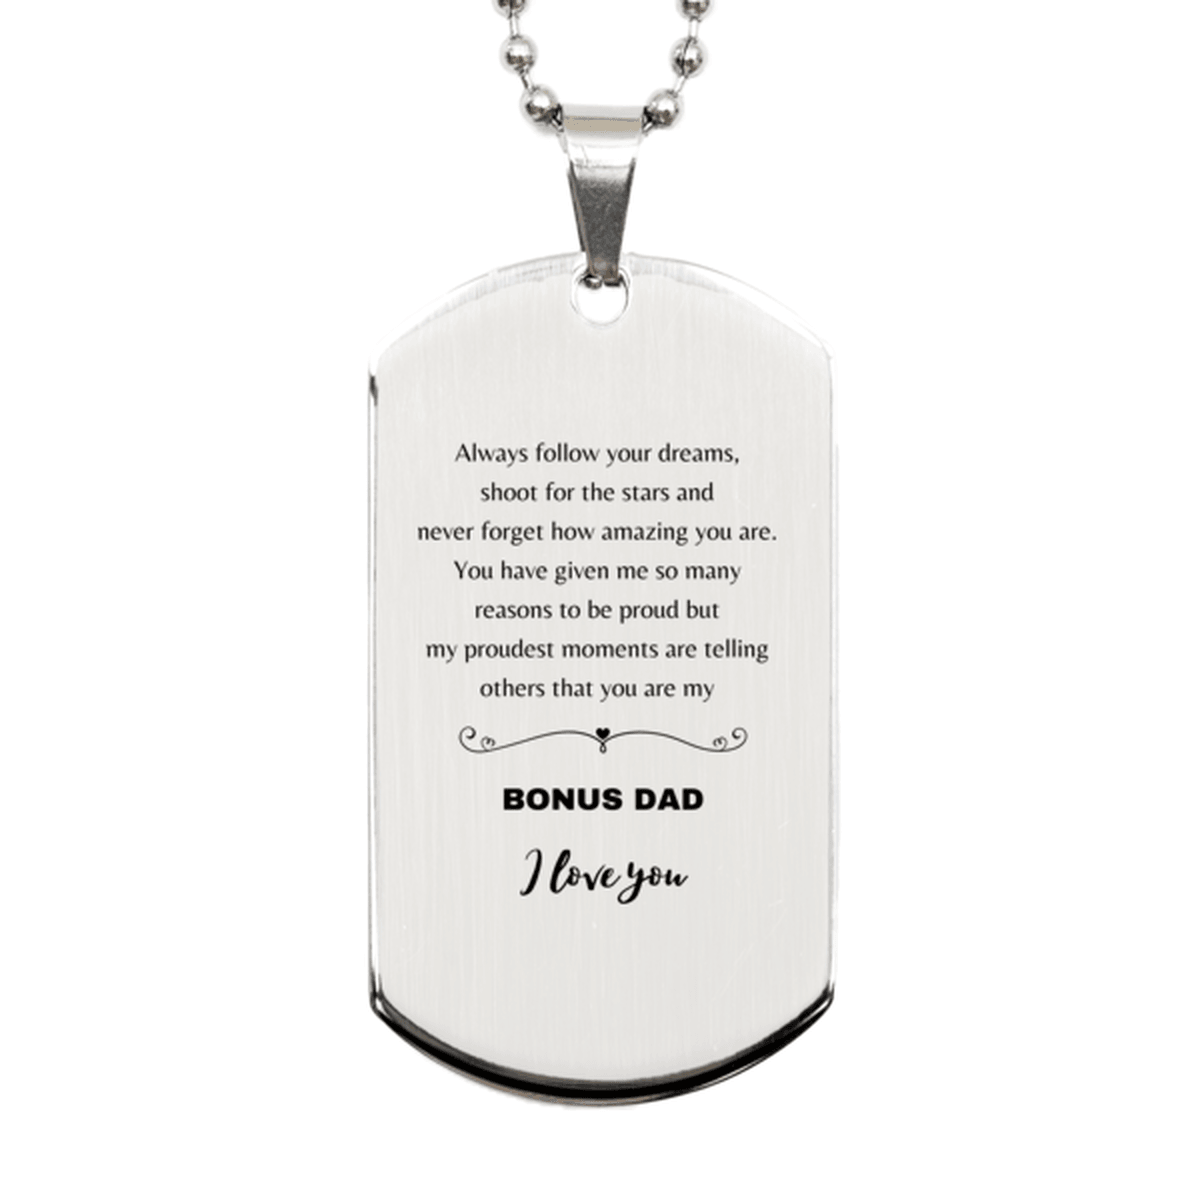 Bonus Dad Engraved Silver Dog Tag Necklace Always follow your dreams, never forget how amazing you are, Birthday Christmas Gifts Jewelry - Mallard Moon Gift Shop